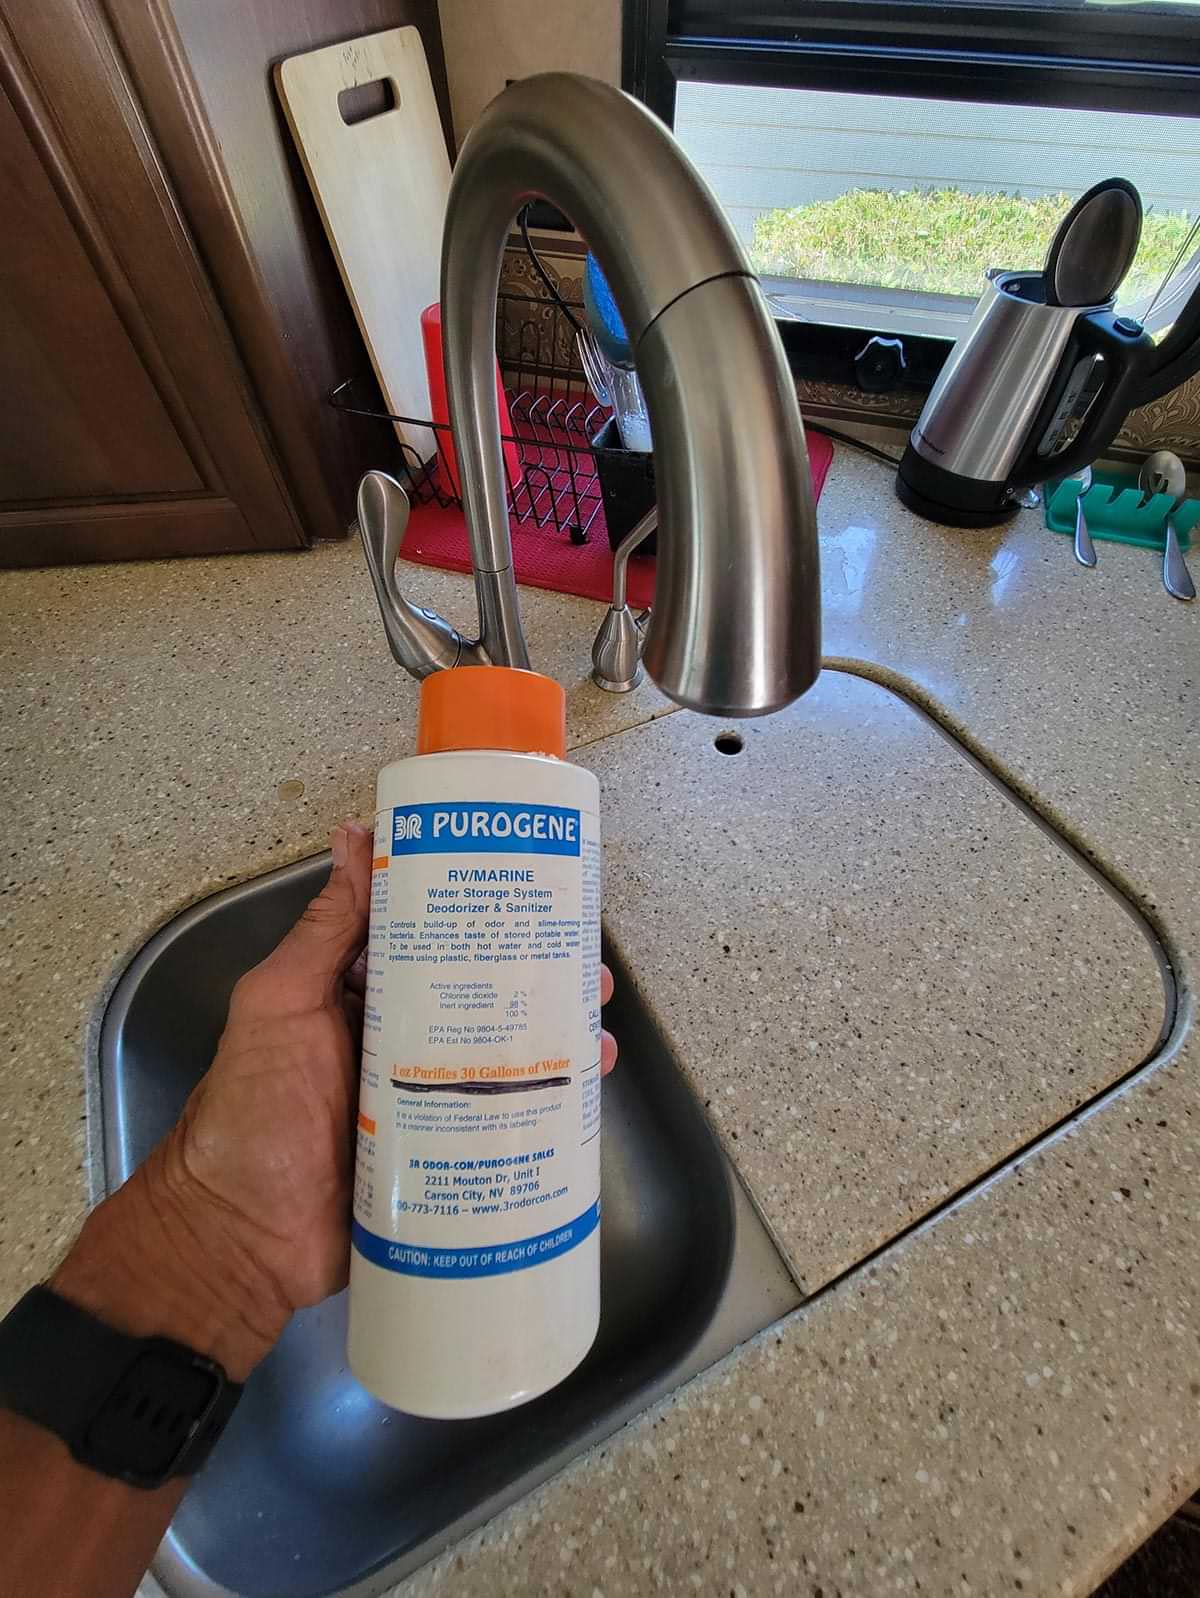 mechanic holds a container of Purogene water treatment in hand while standing at an RV sink